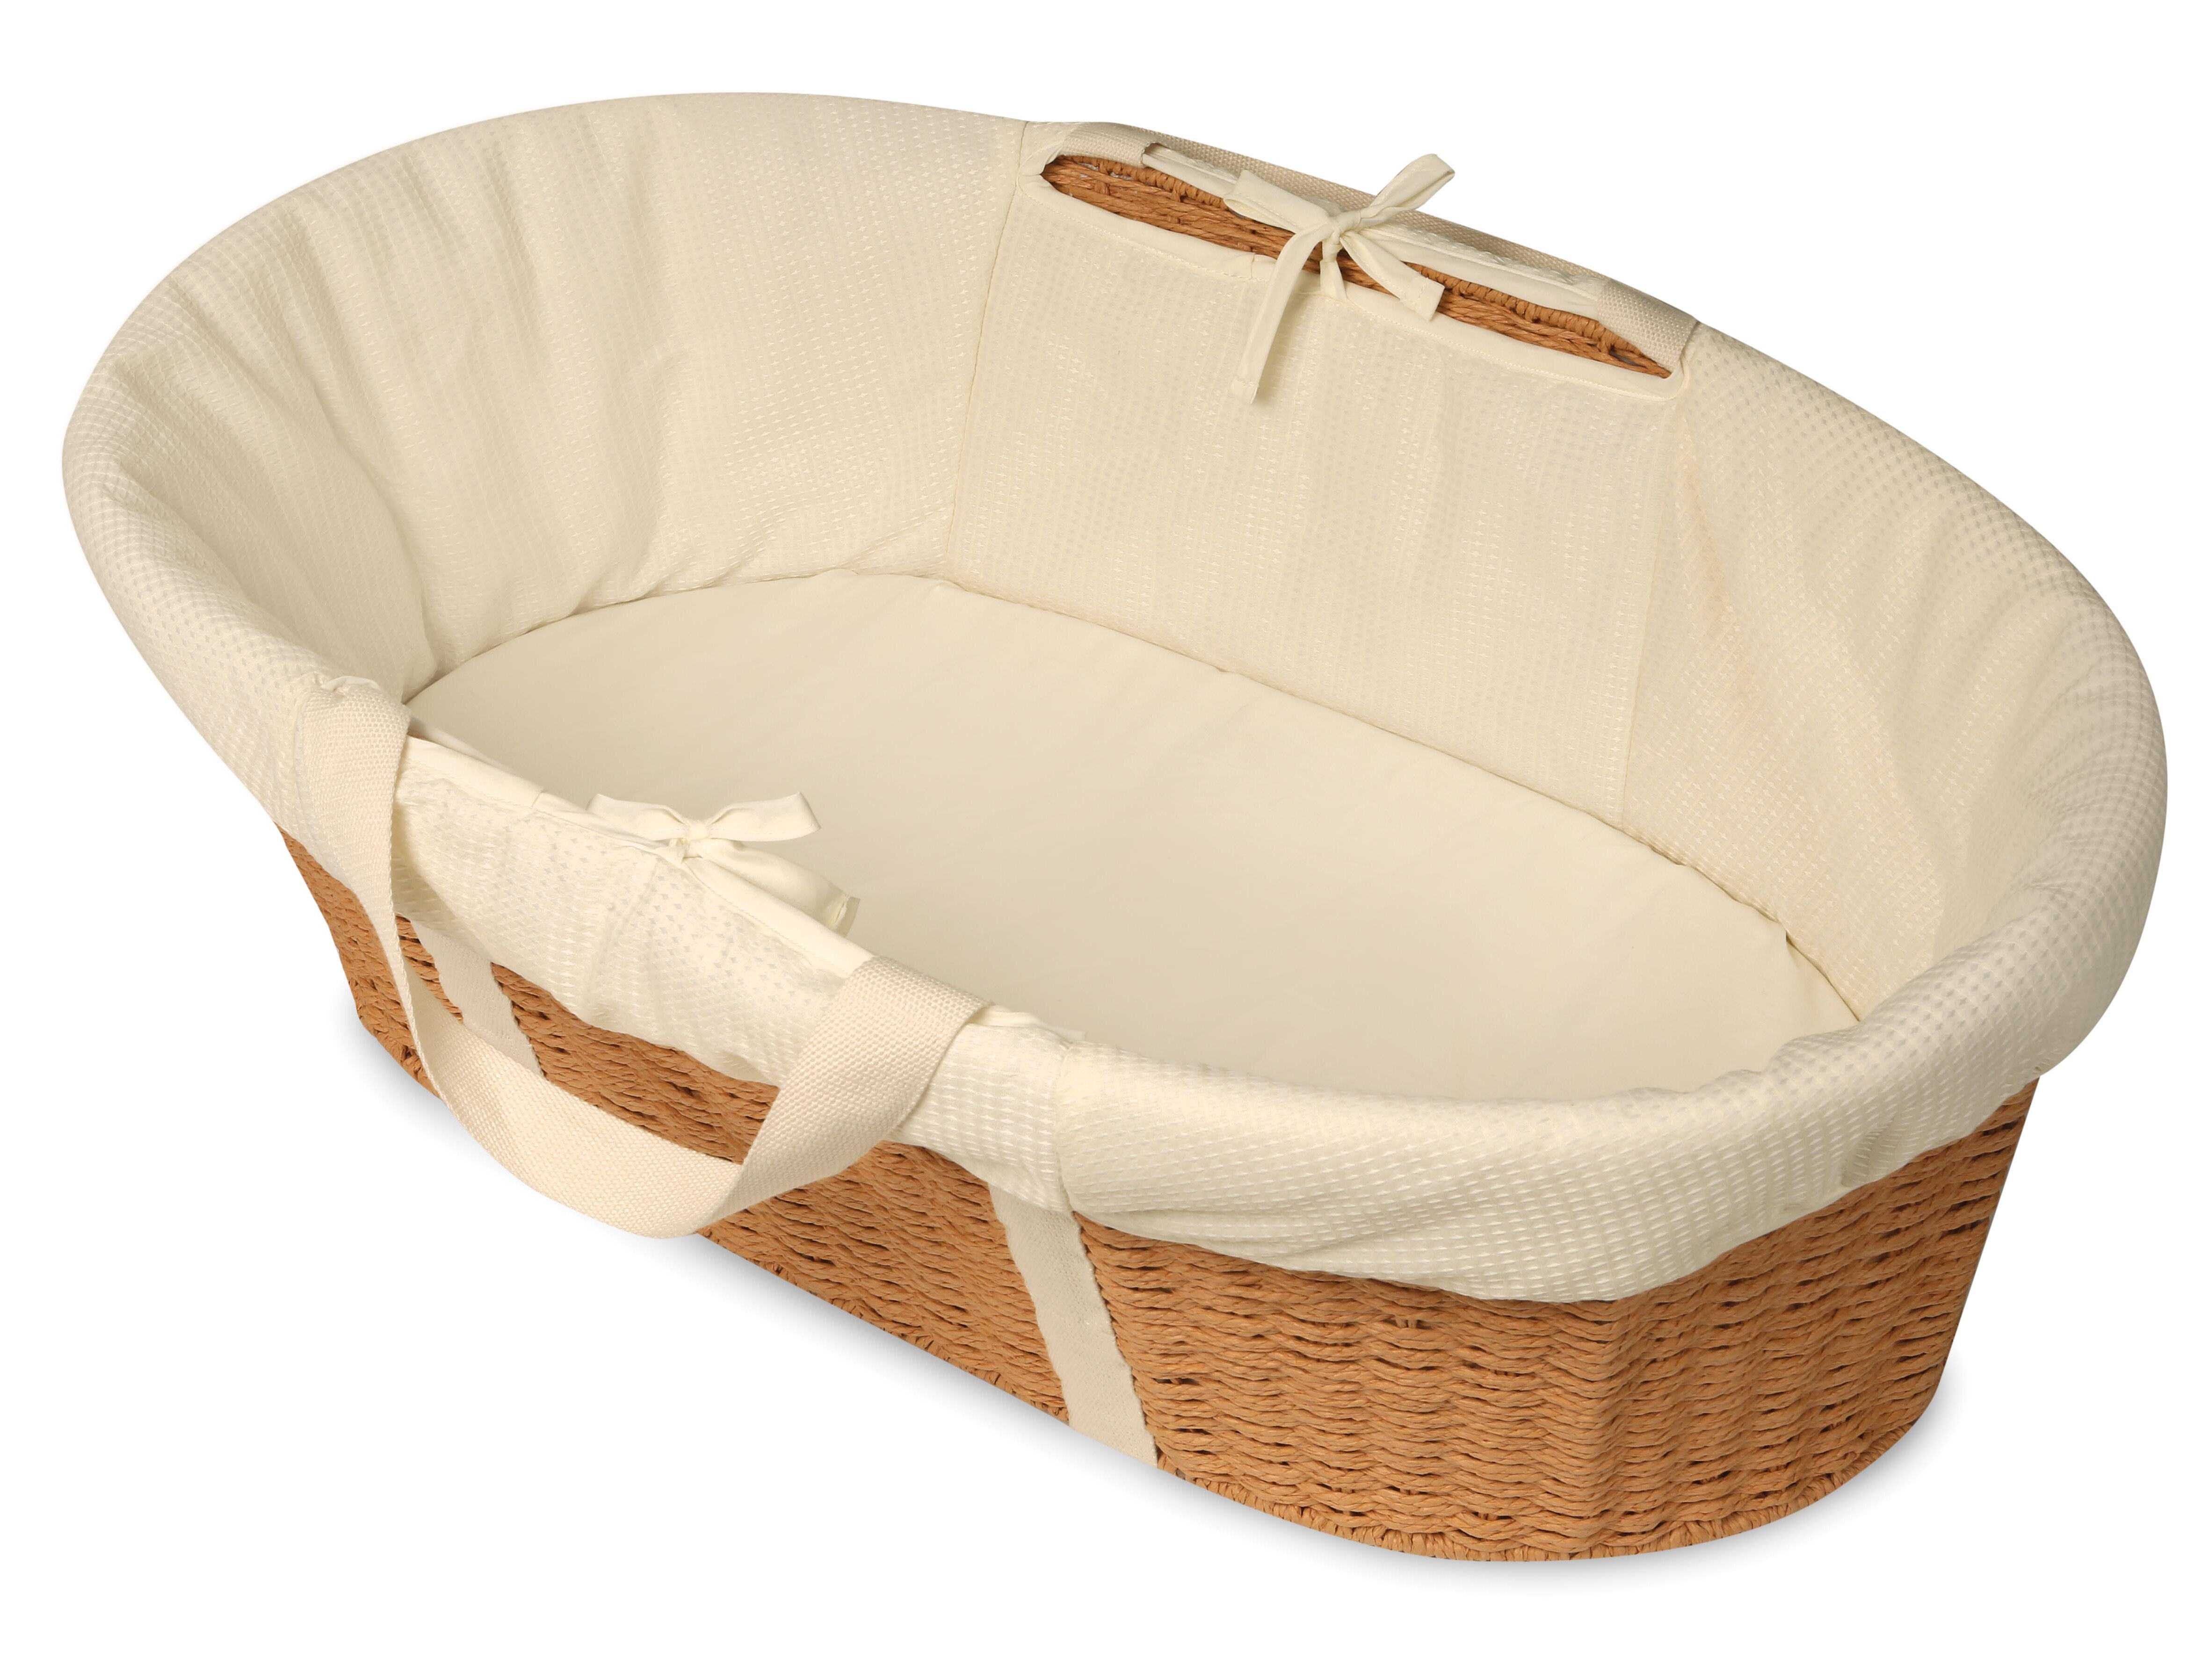 Baby Moses Basket with bedding textile Vintage Flowers